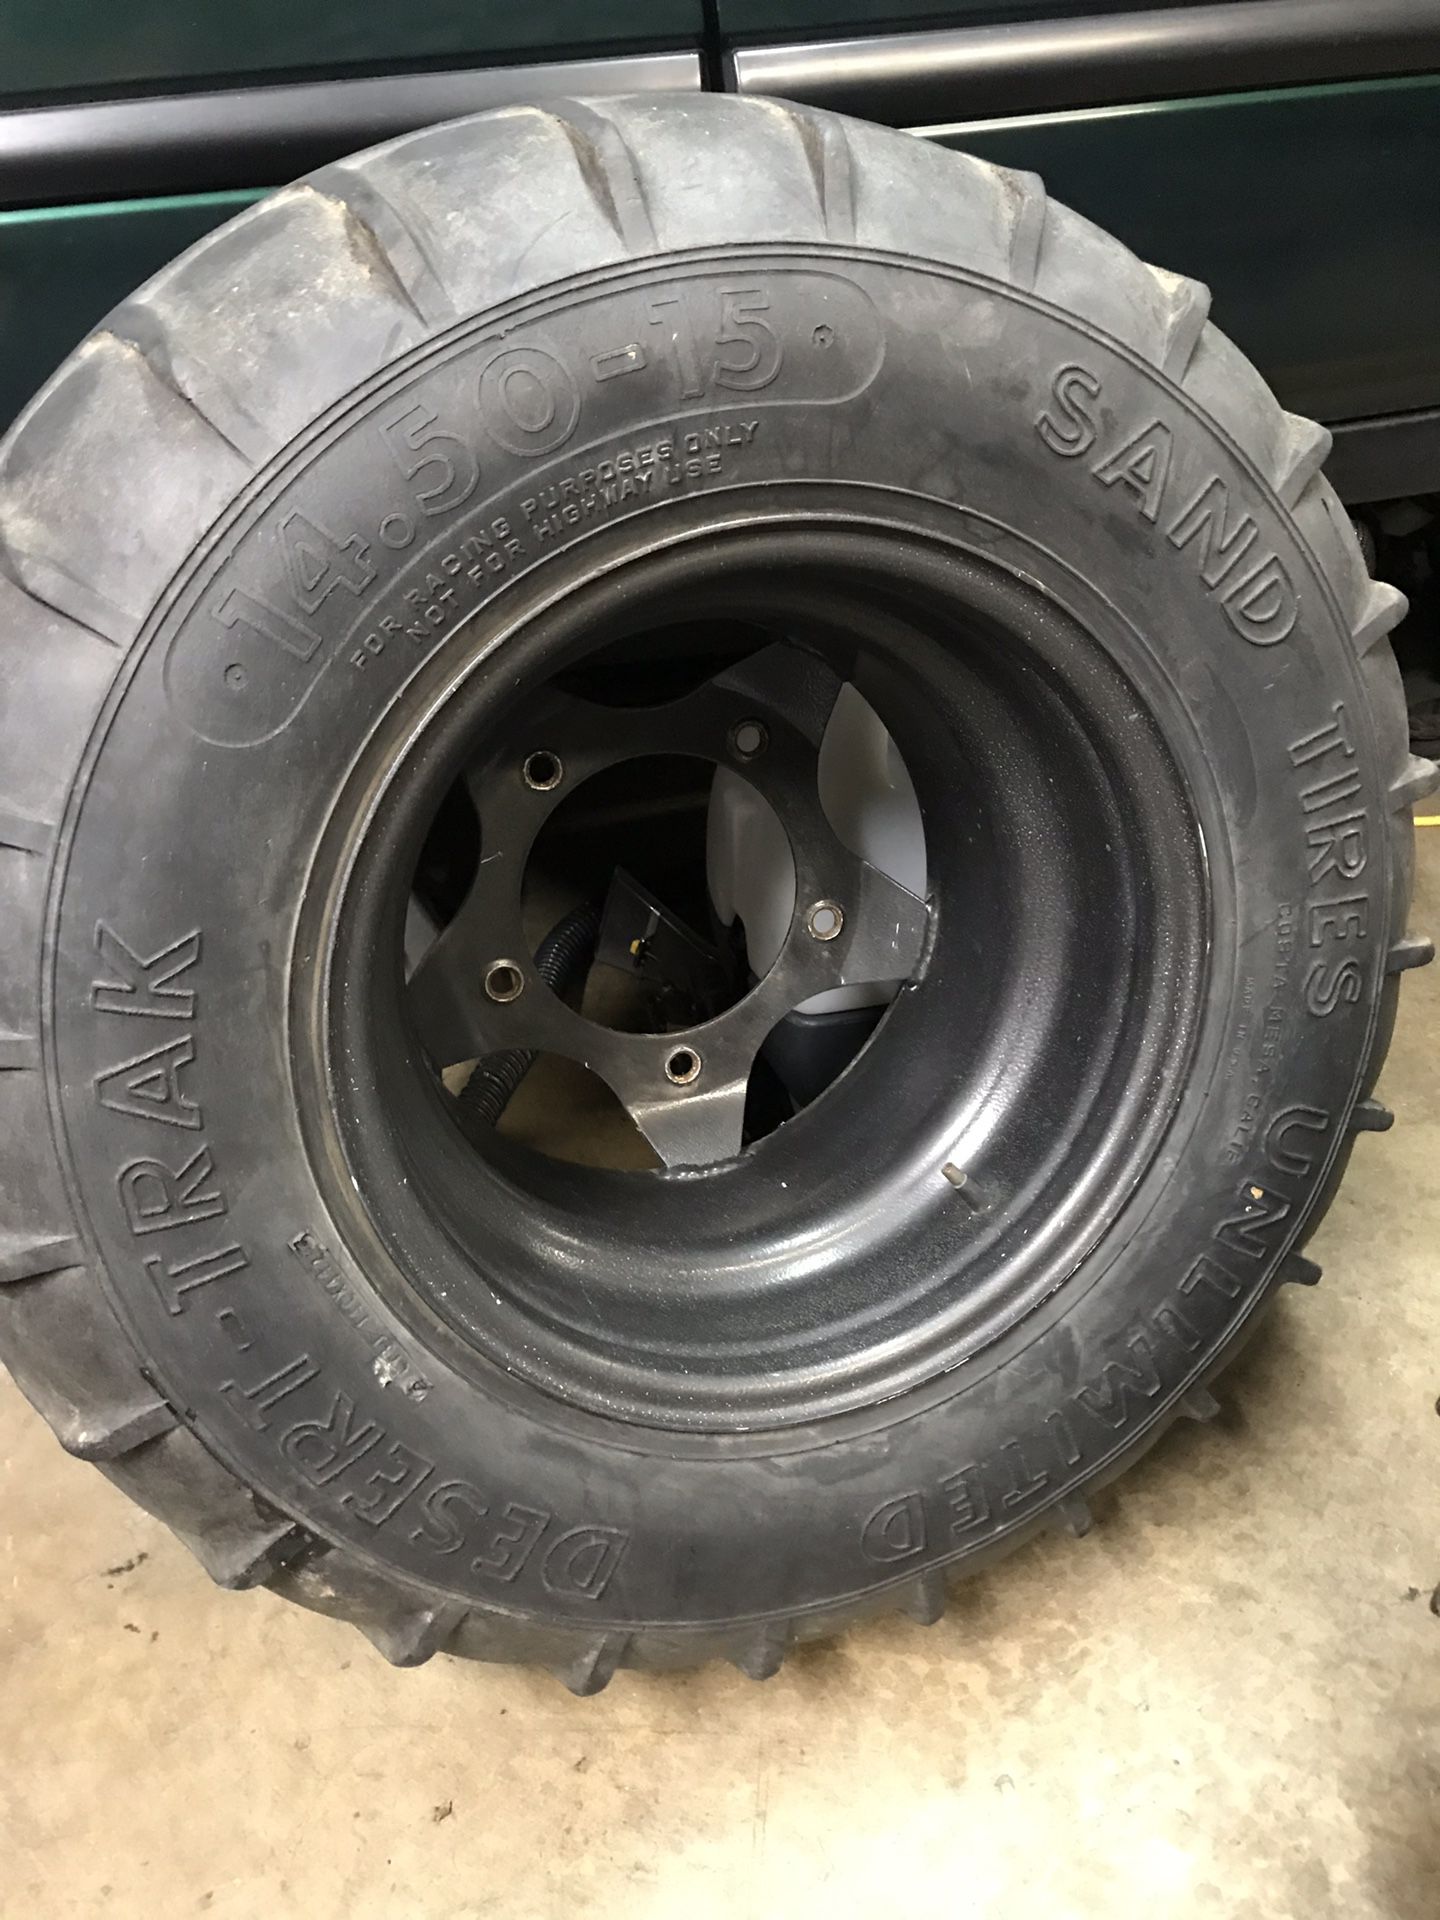 VW wide 5 wheels and sand tire unlimited tires. Baja sandrail